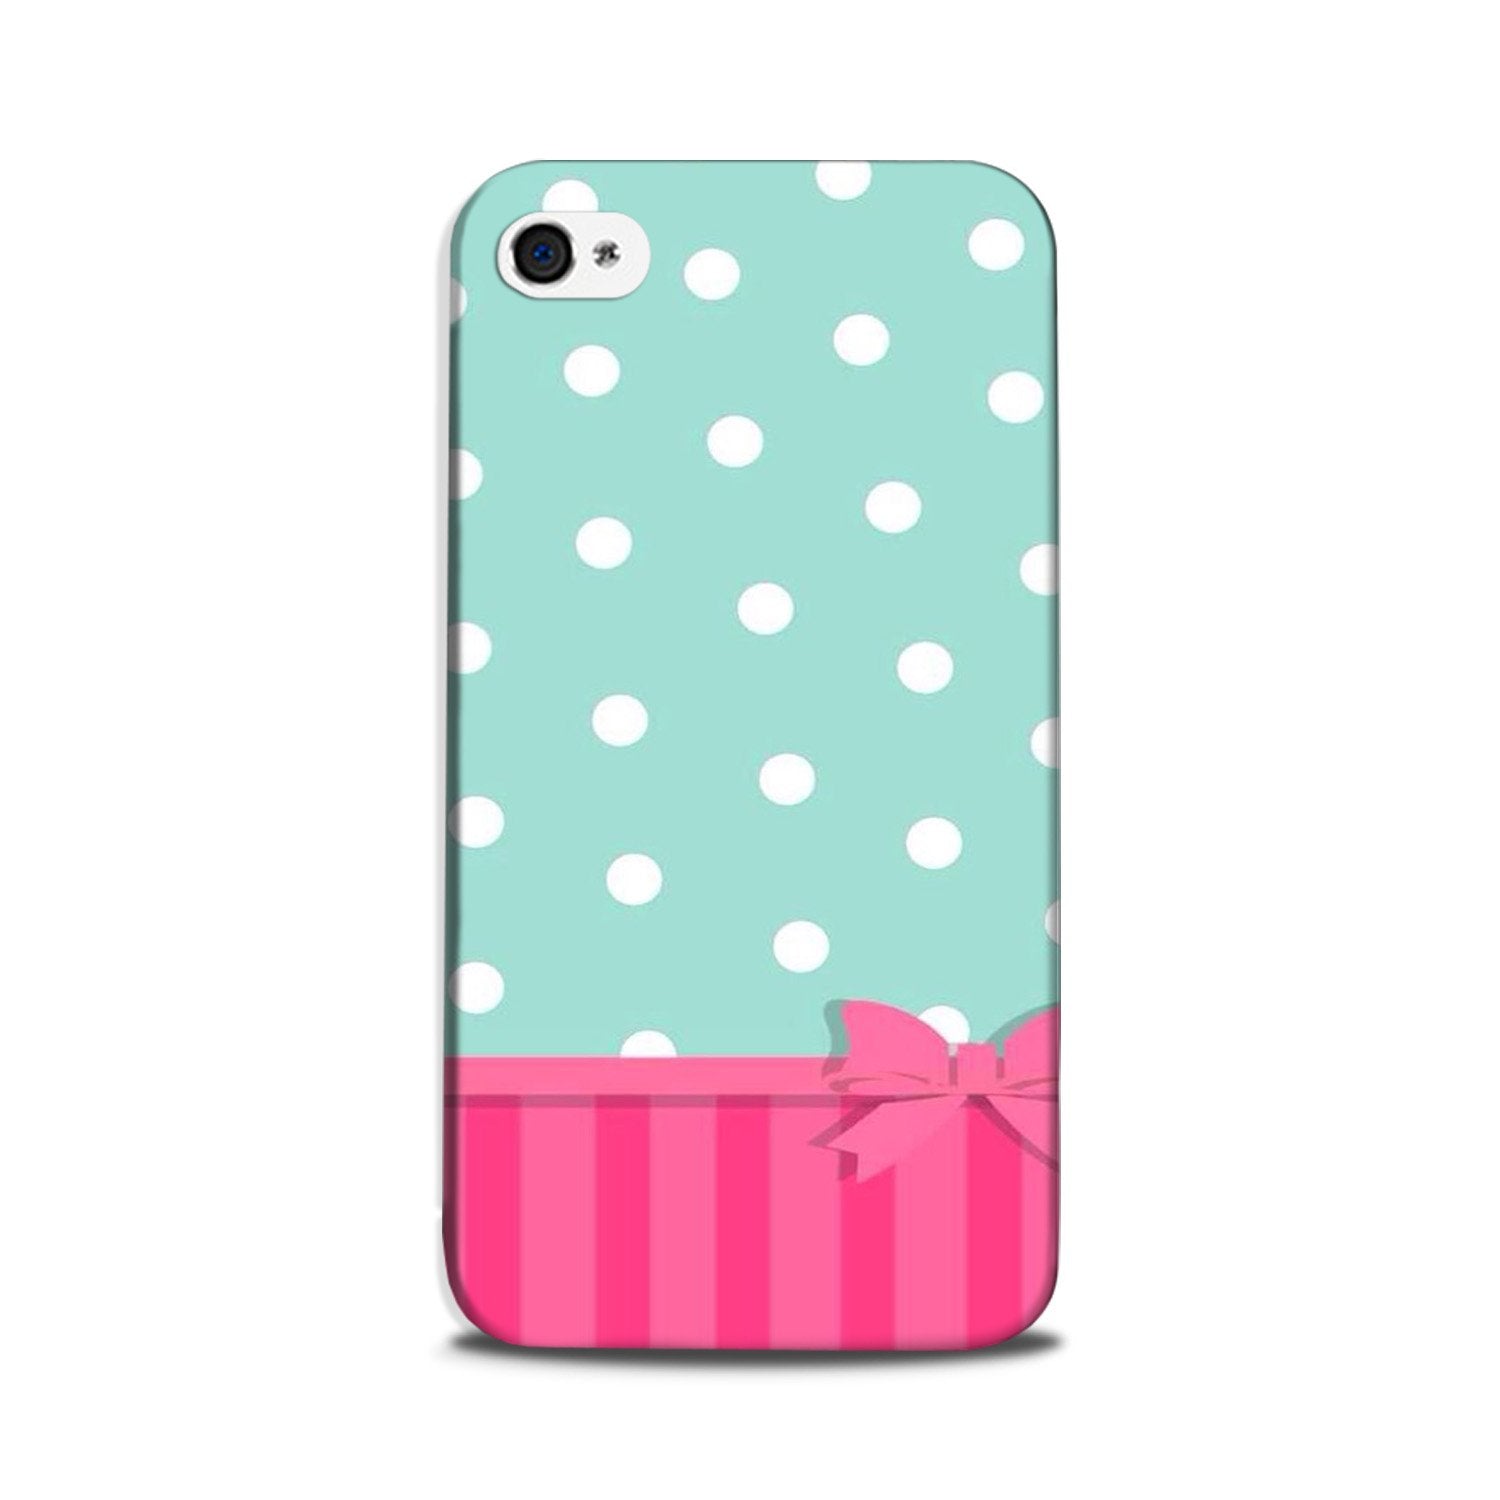 Gift Wrap Case for iPhone 5/ 5s